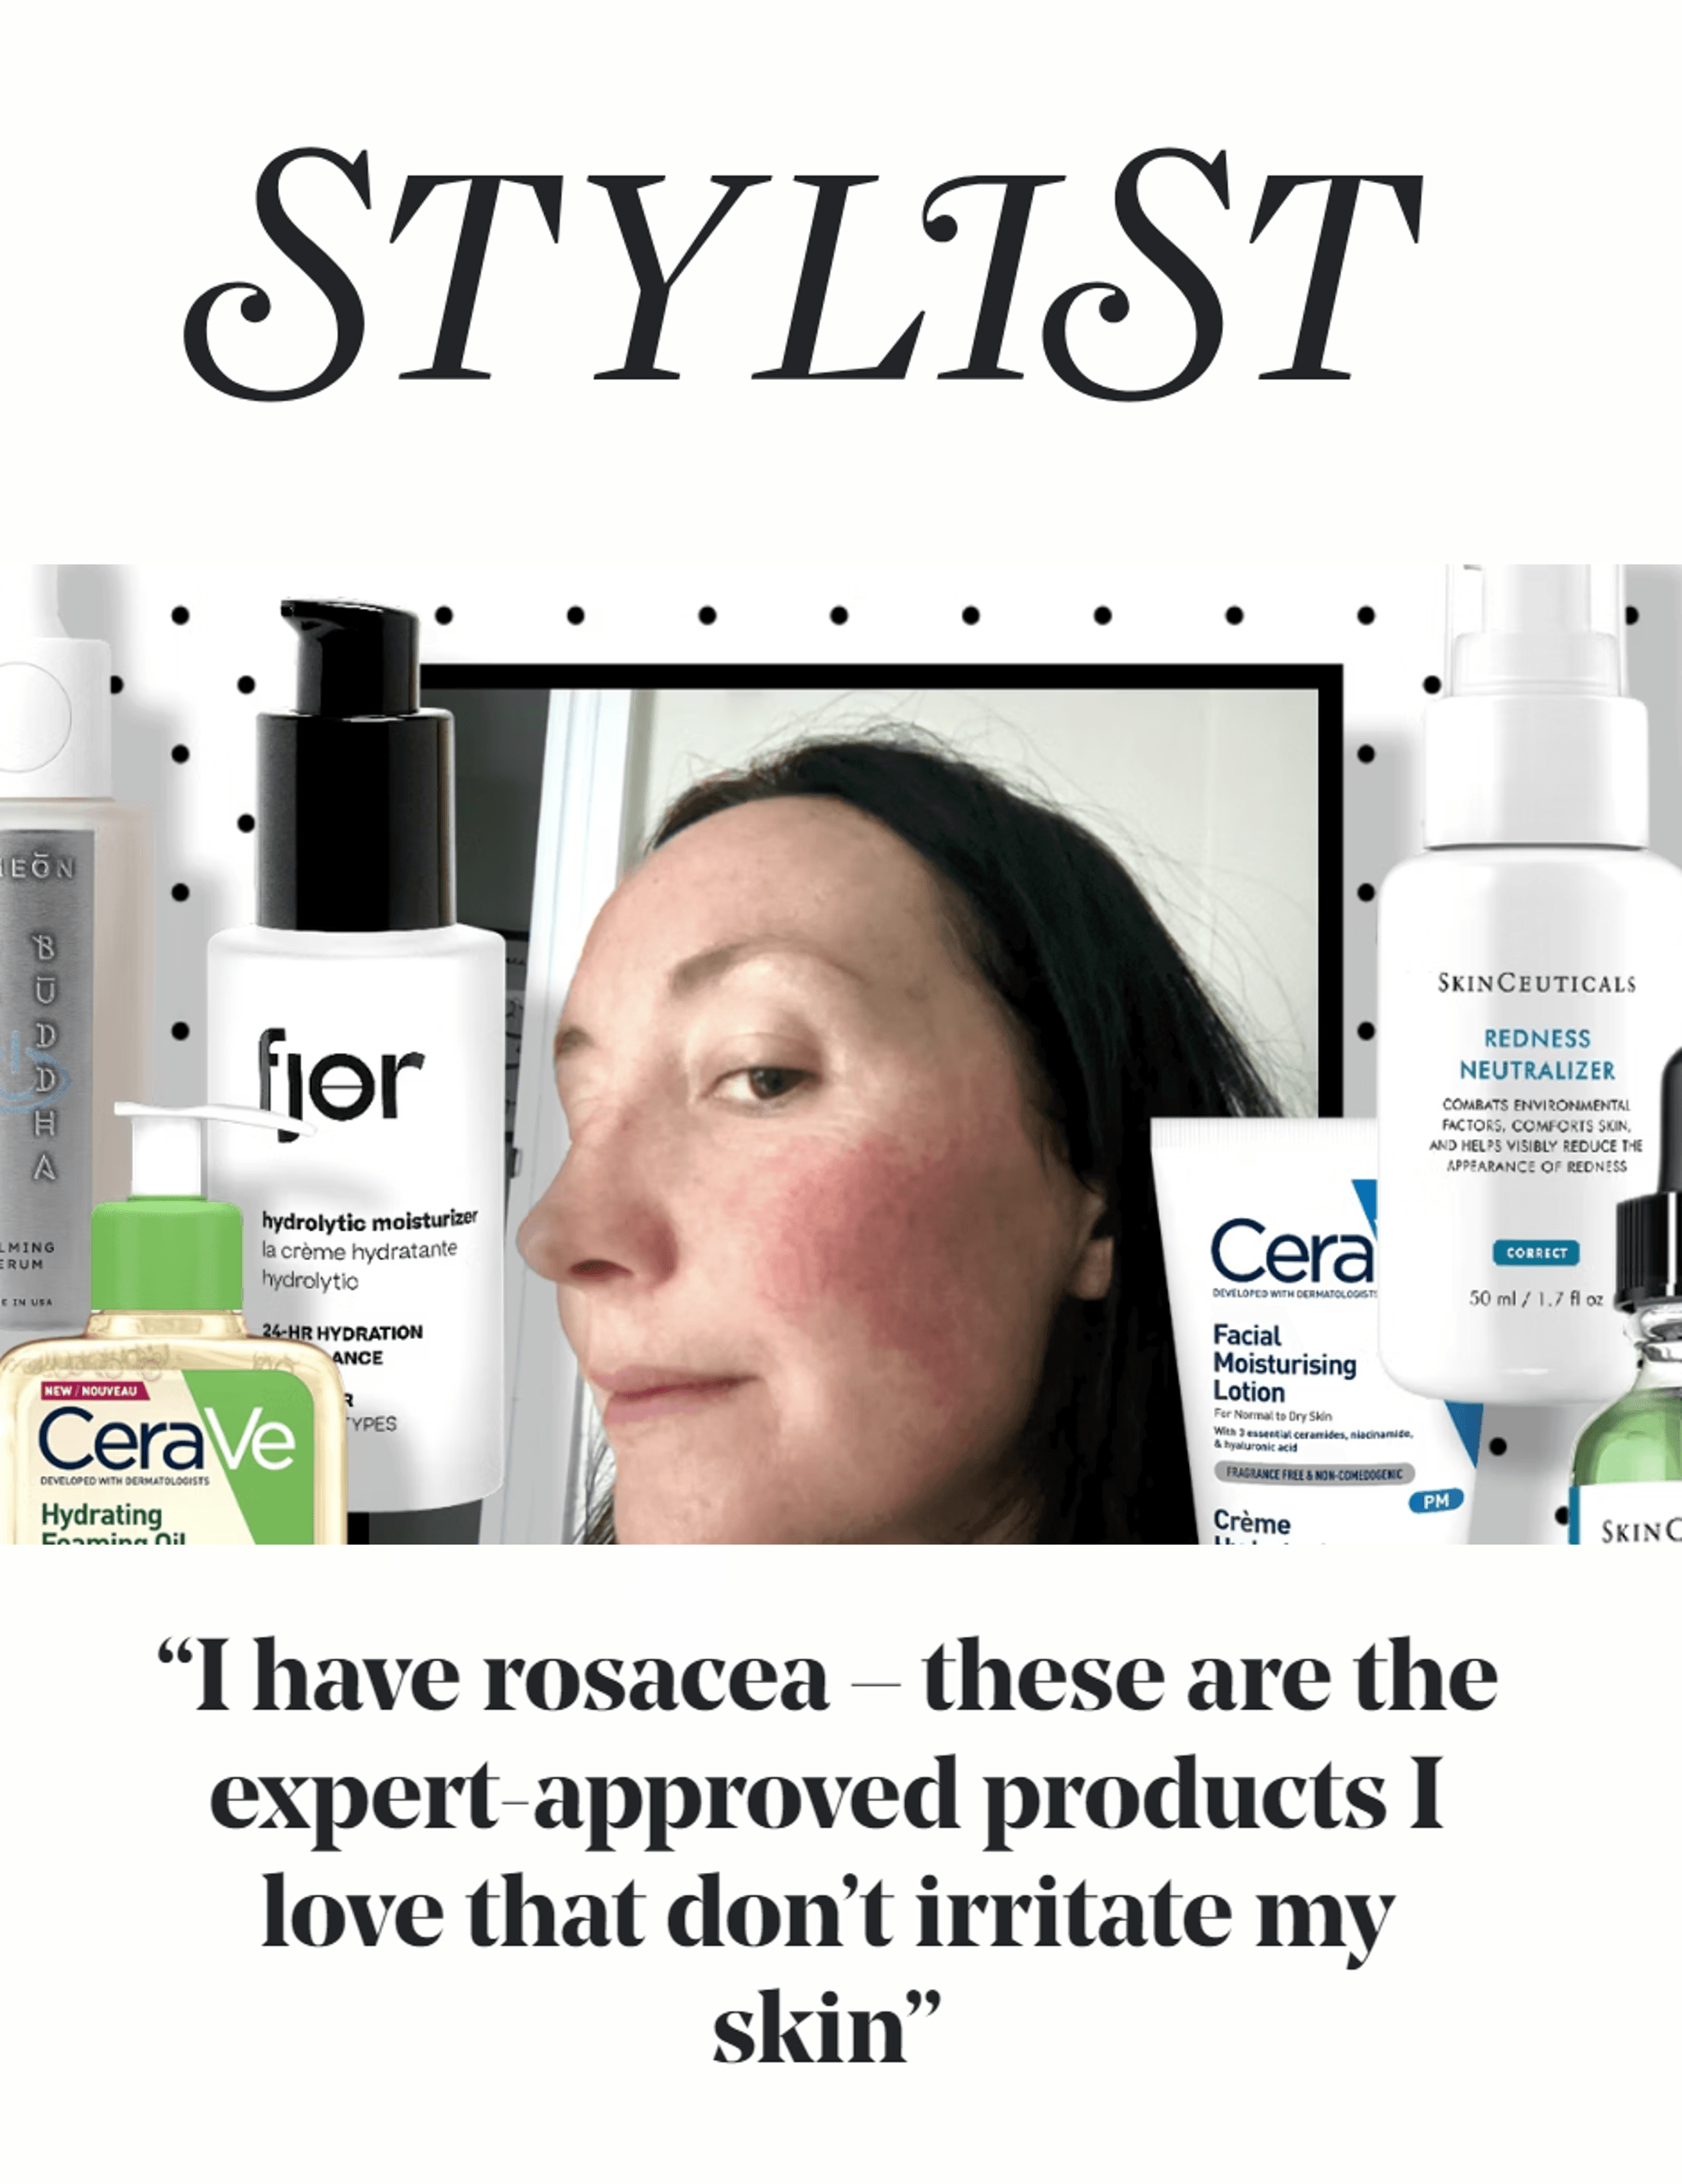 Stylist - I have rosacea – these are the expert-approved products I love that don’t irritate my skin - fjör